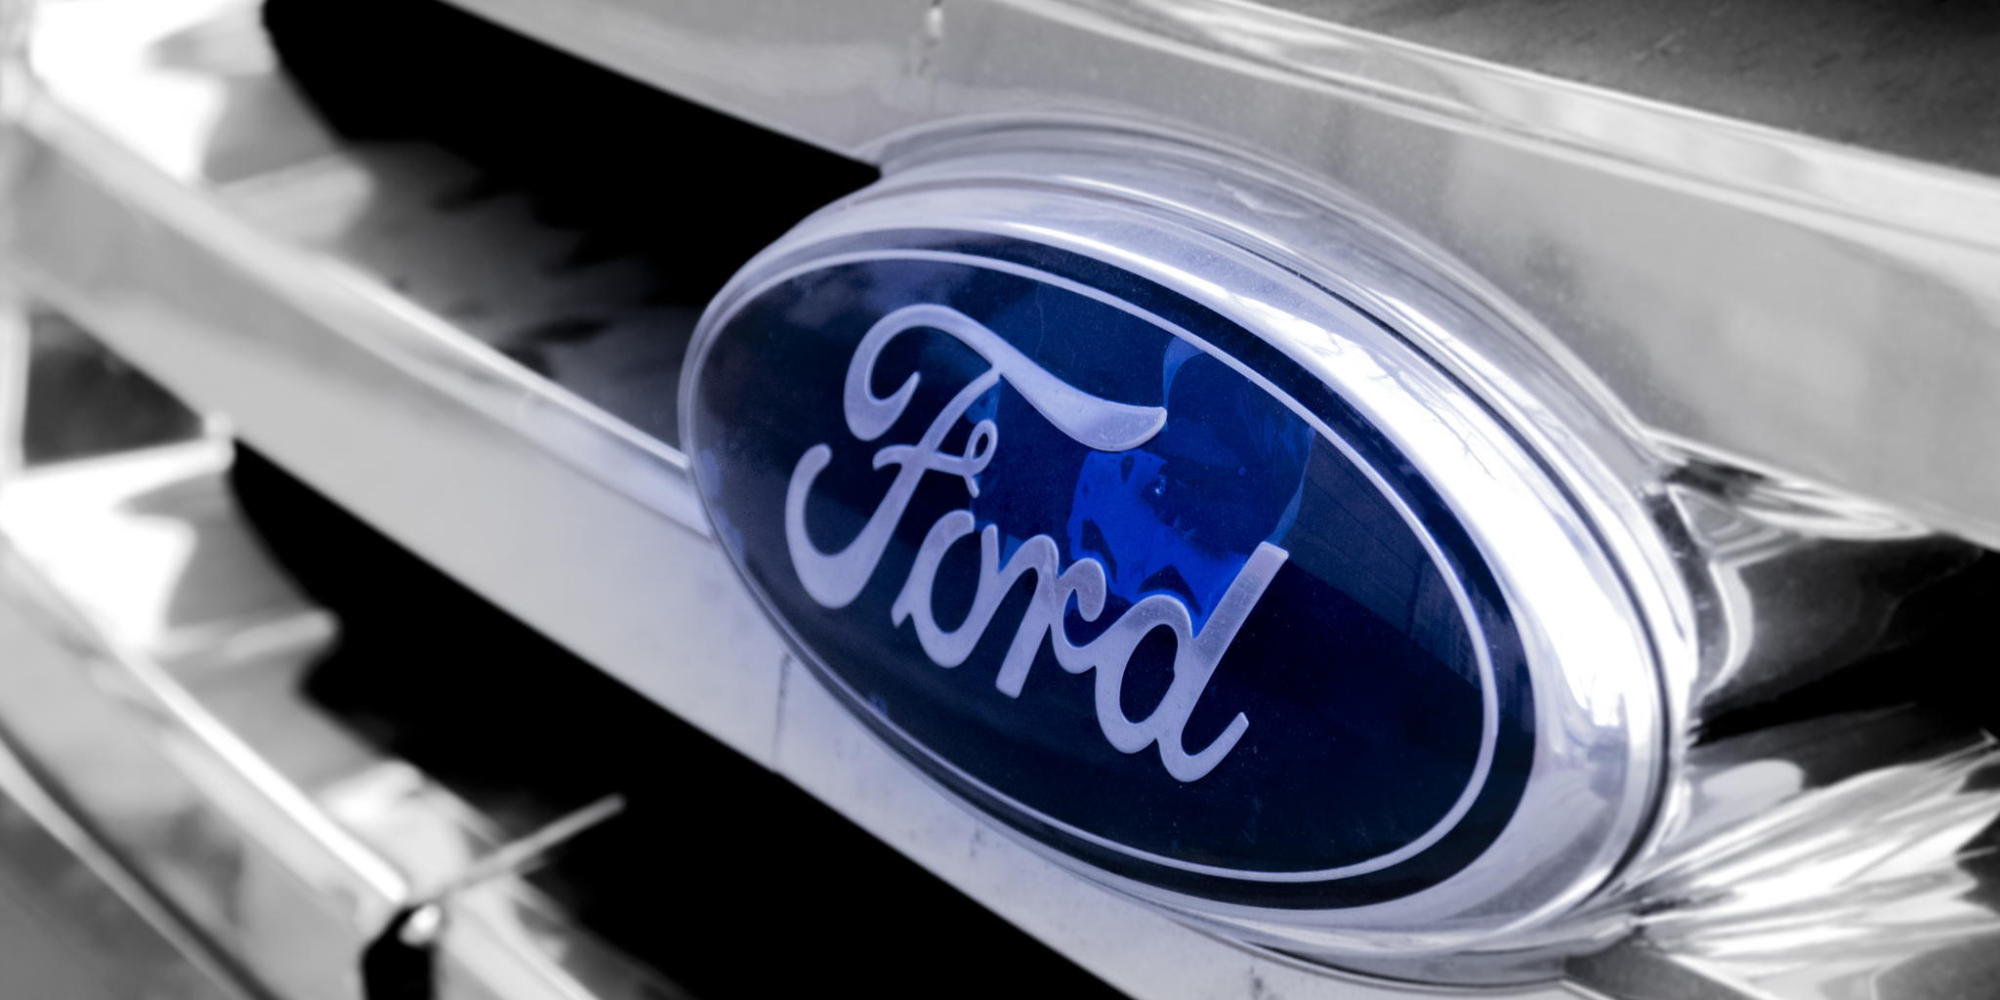 Ford supporting gays #10